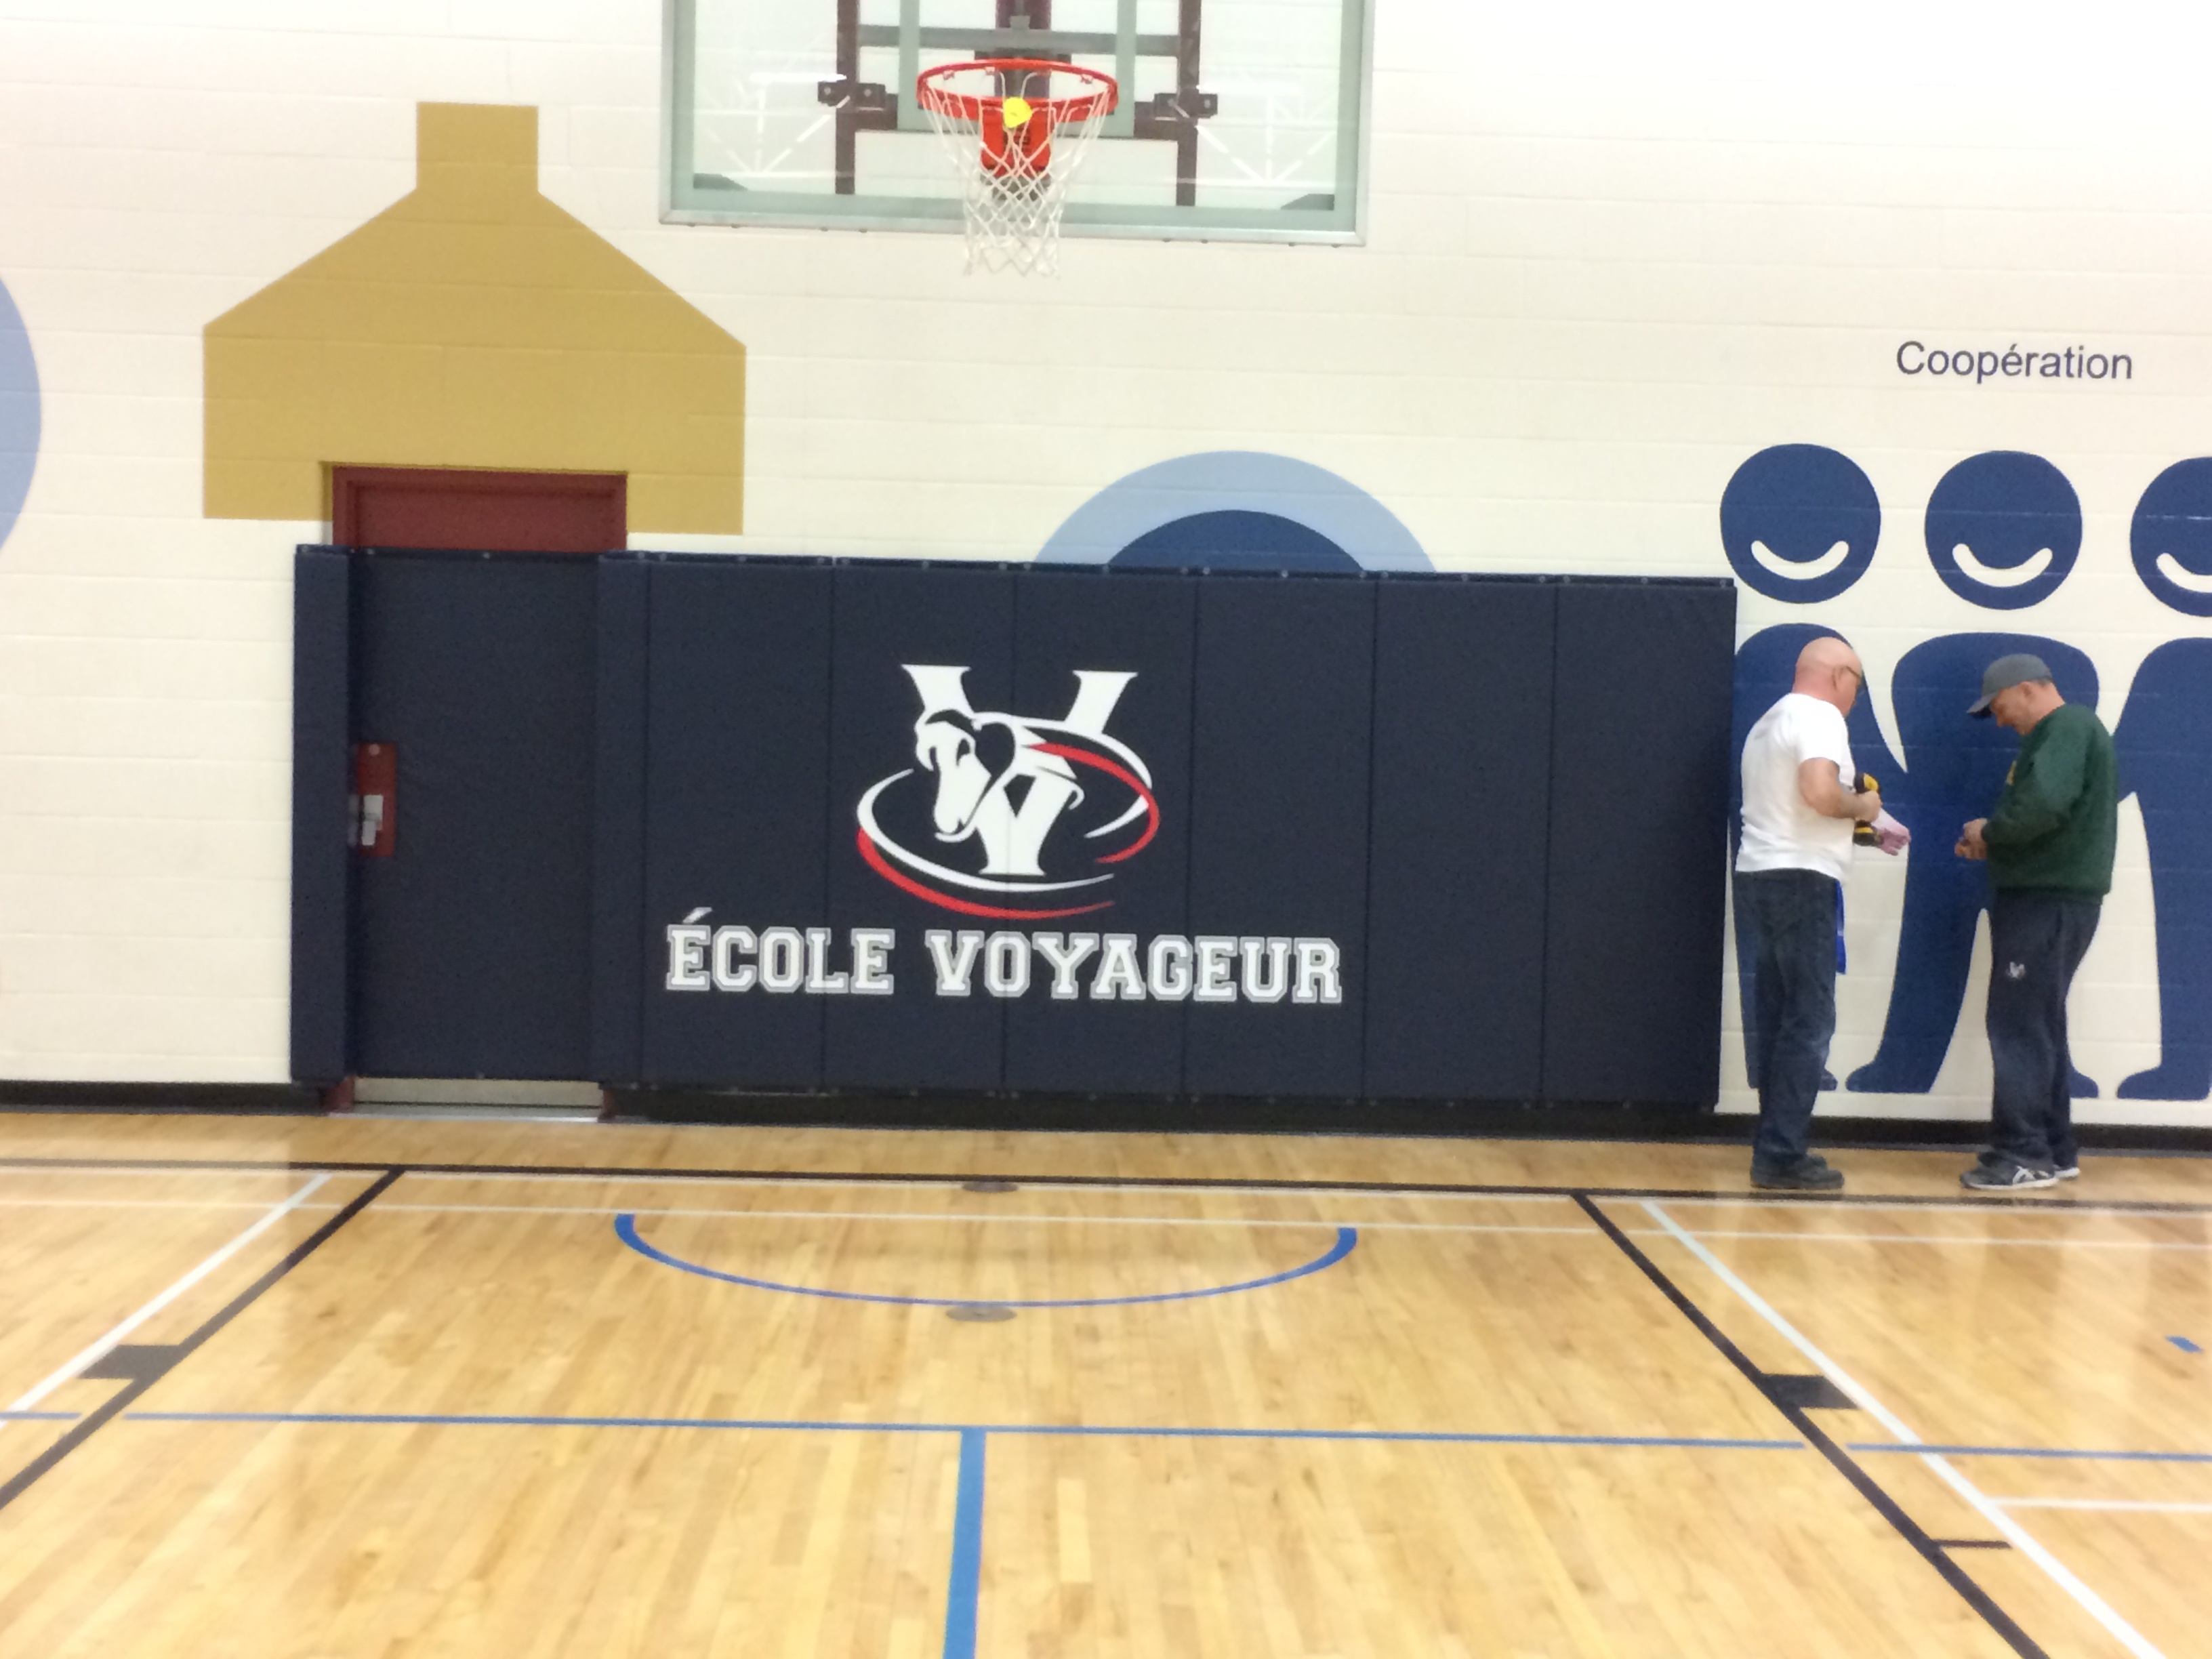 wall-and-door-padding-ecole-voyager.jpg